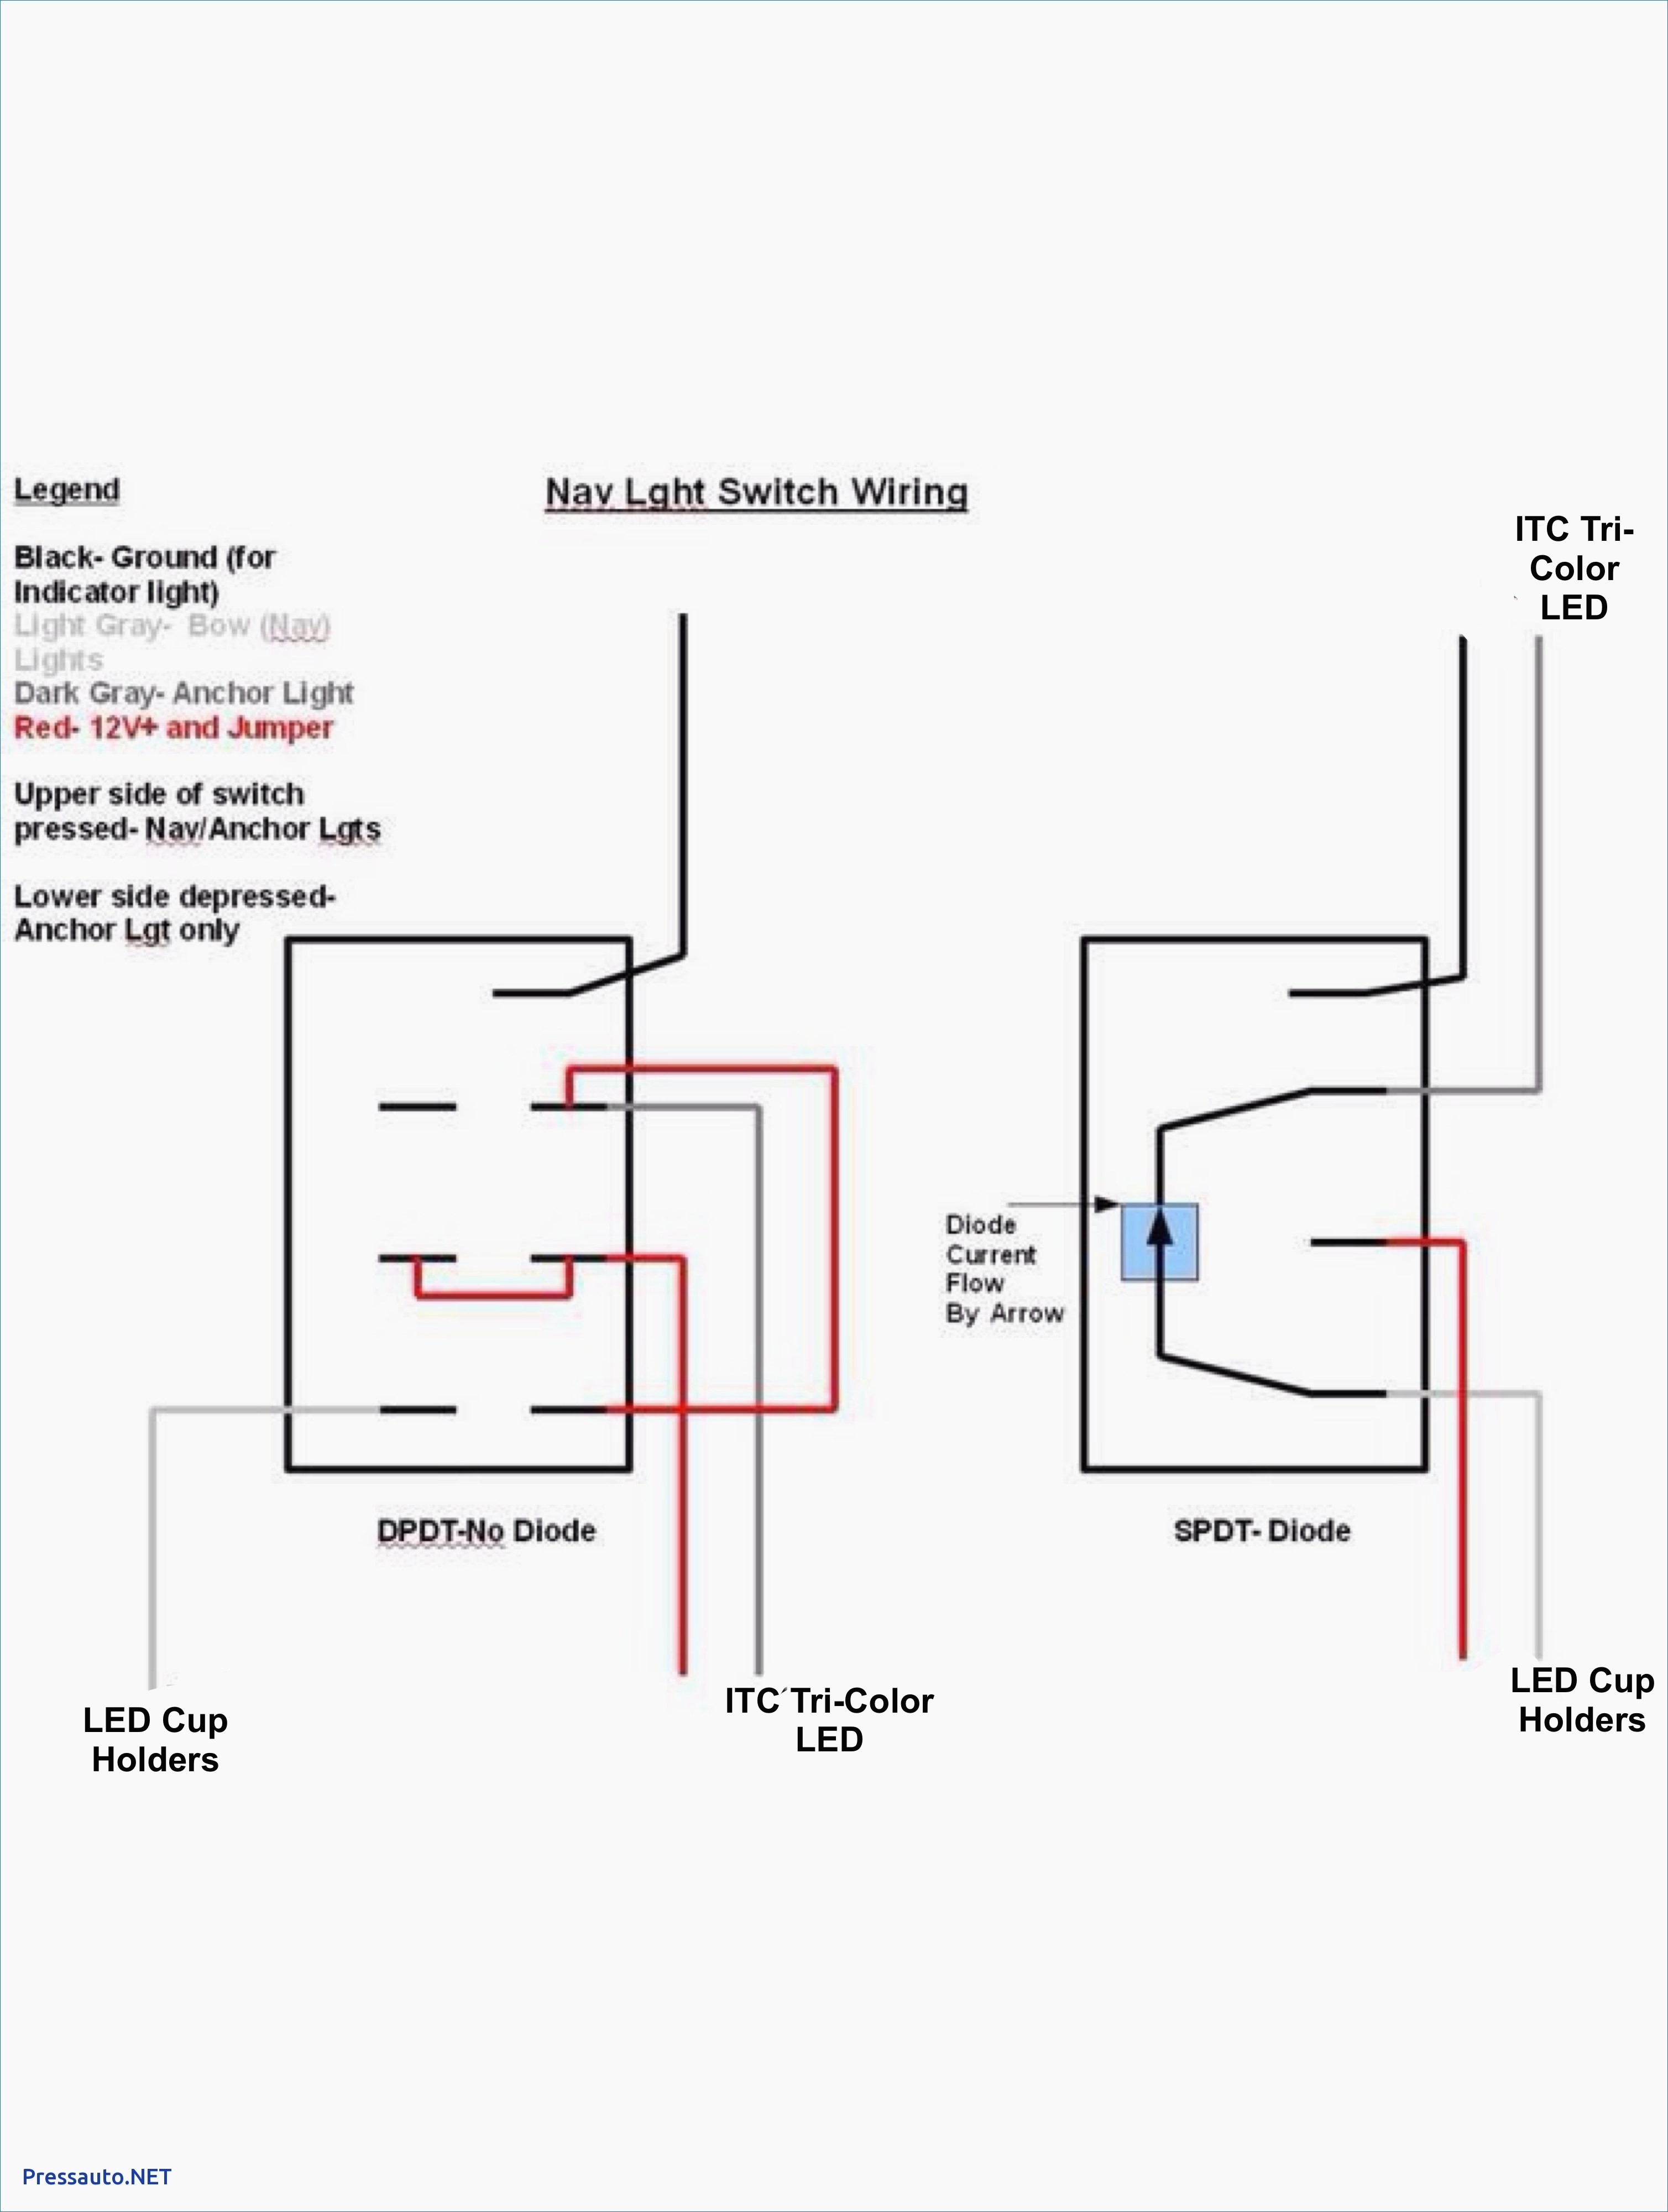 Lighted Rocker Switch Wiring Diagram Wiring Diagram within 2 Pole Also 7 Pin Rocker Switch